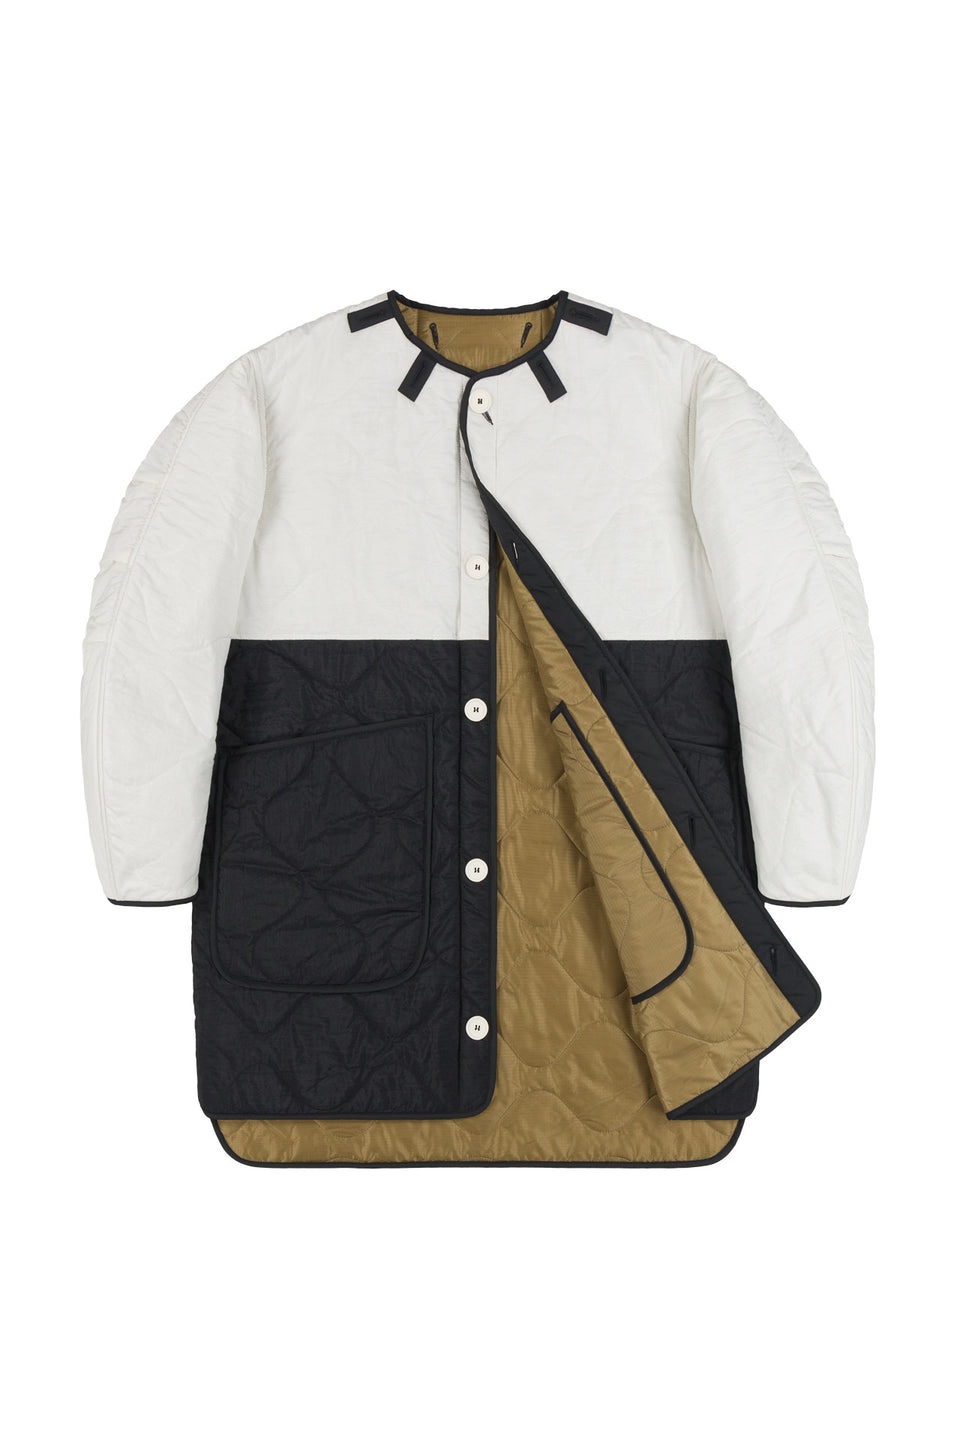 Colourblock Quilt Jacket - White / Gold (listing page thumbnail)